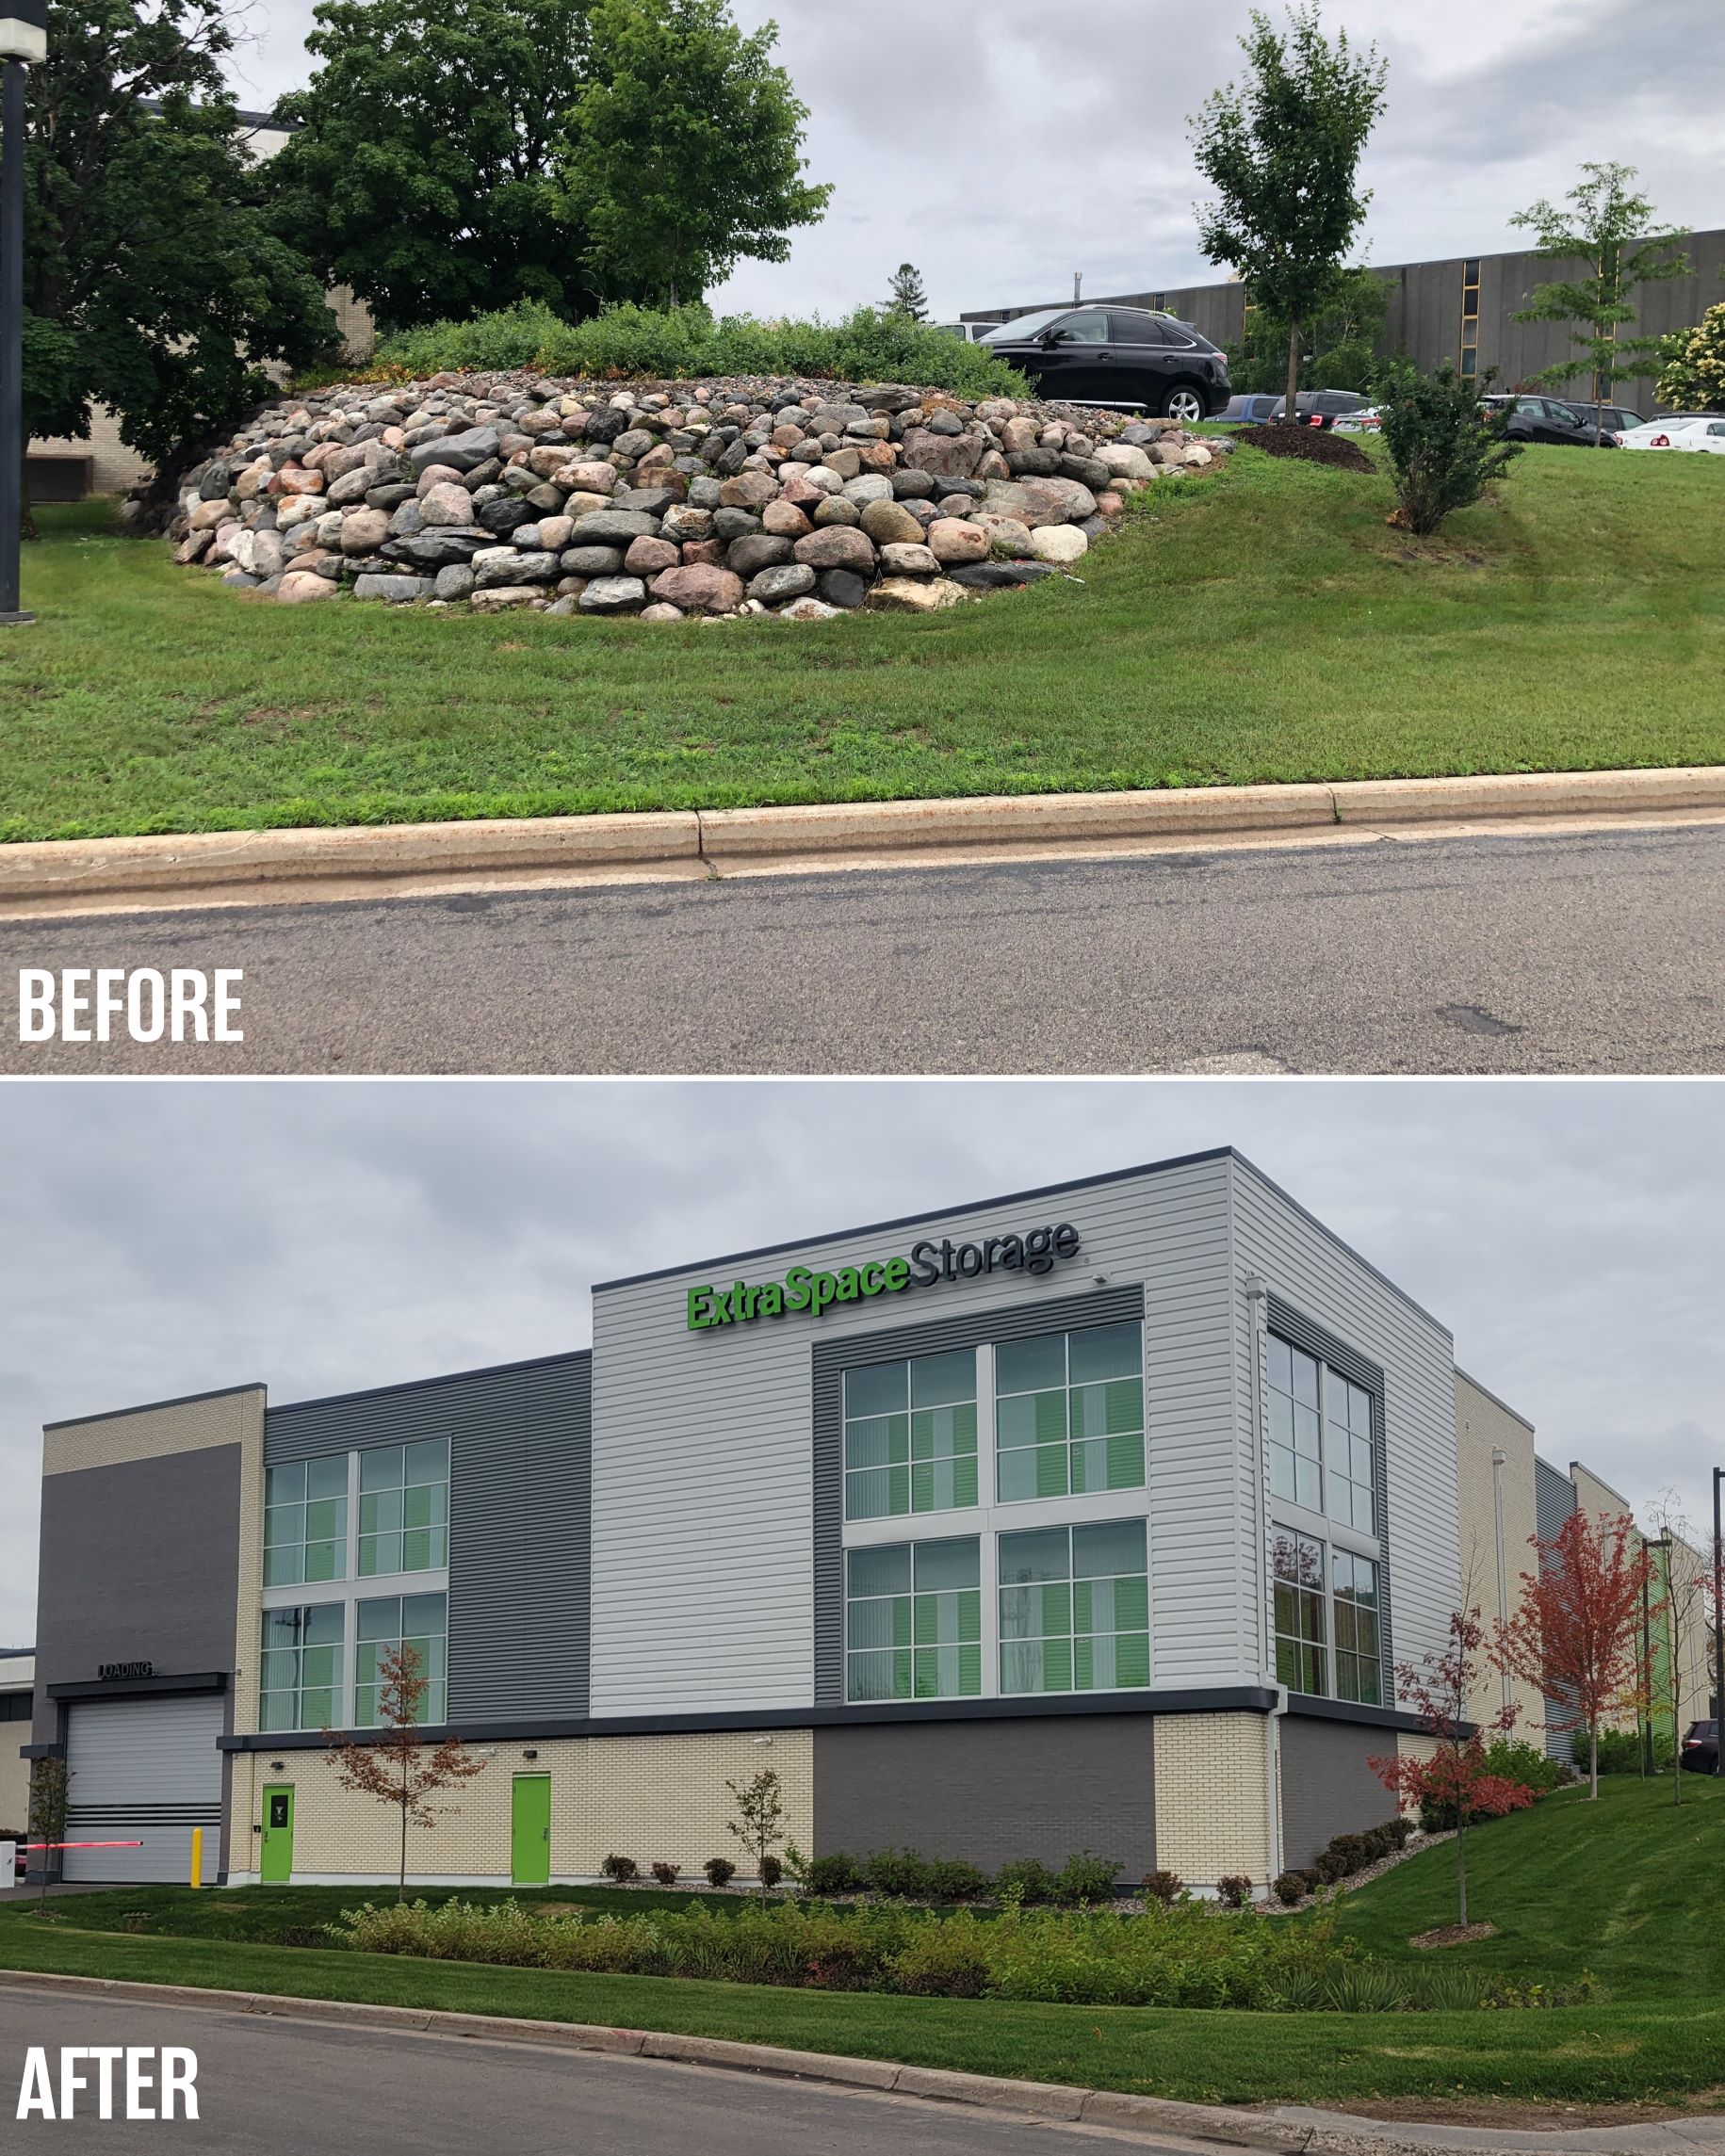 Before & After: Front of Expanded Minneapolis Extra Space Storage Facility